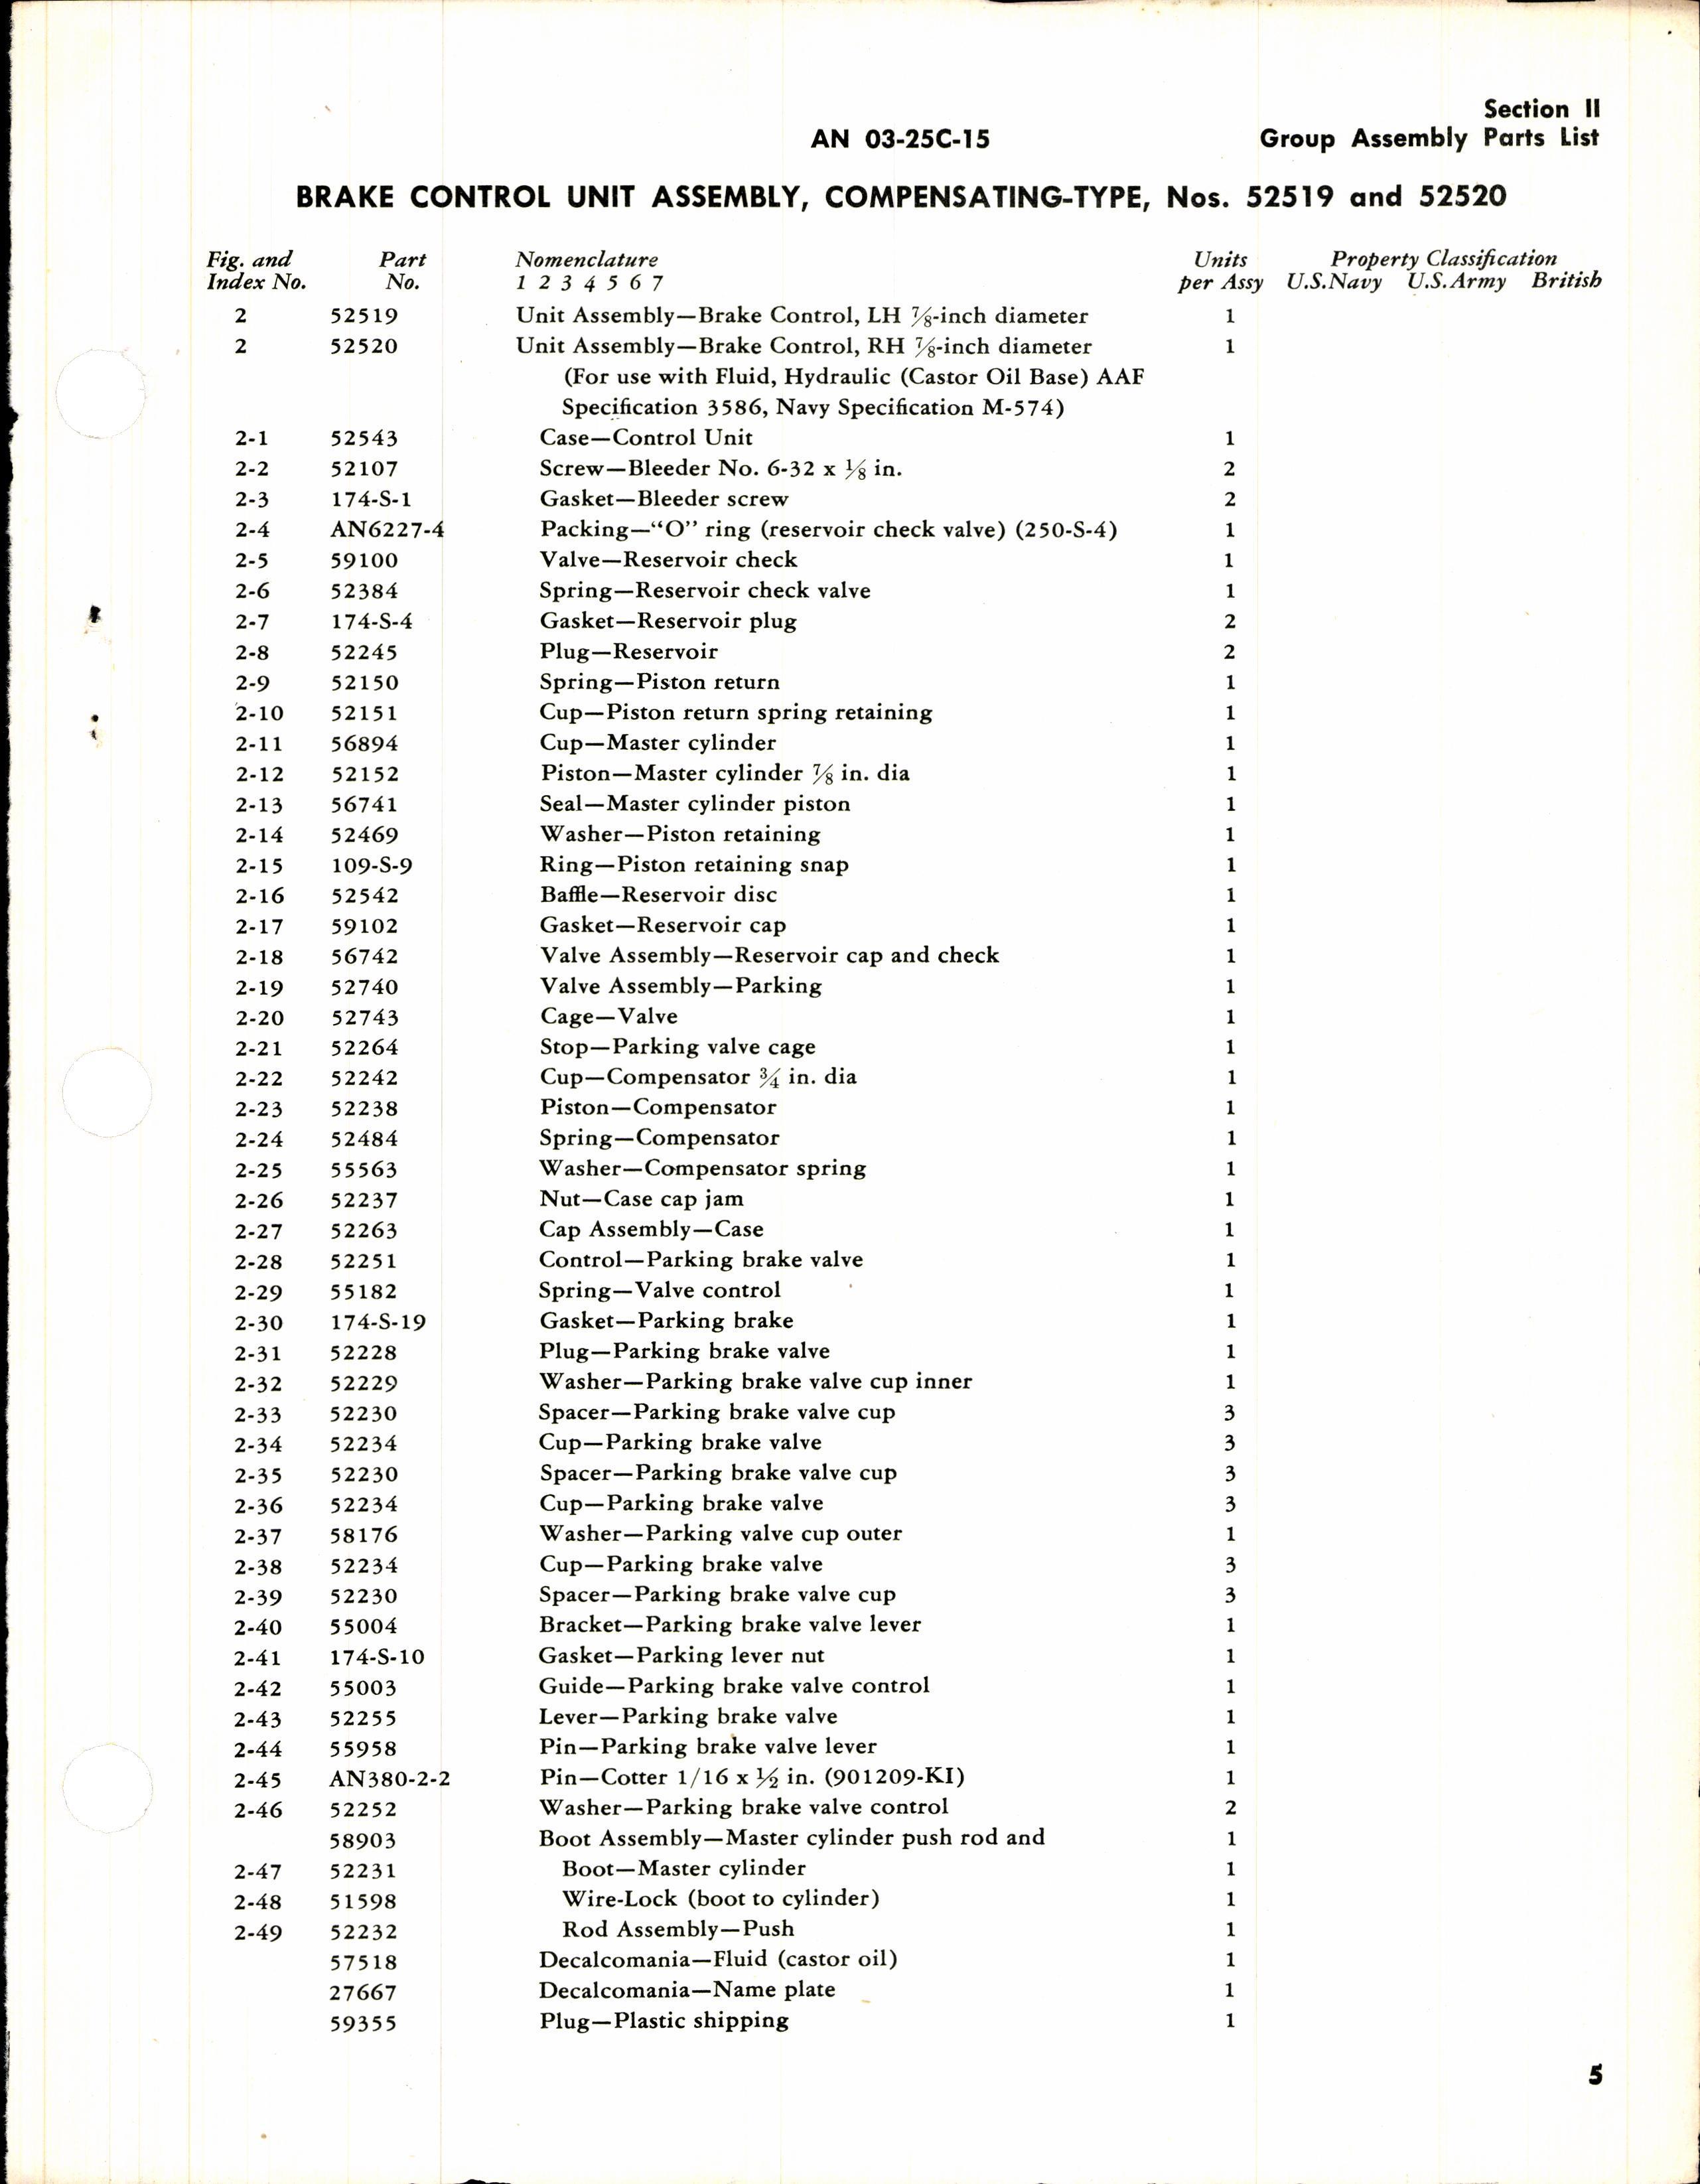 Sample page 3 from AirCorps Library document: Parts Catalog for Bendix Master Brake Cylinders